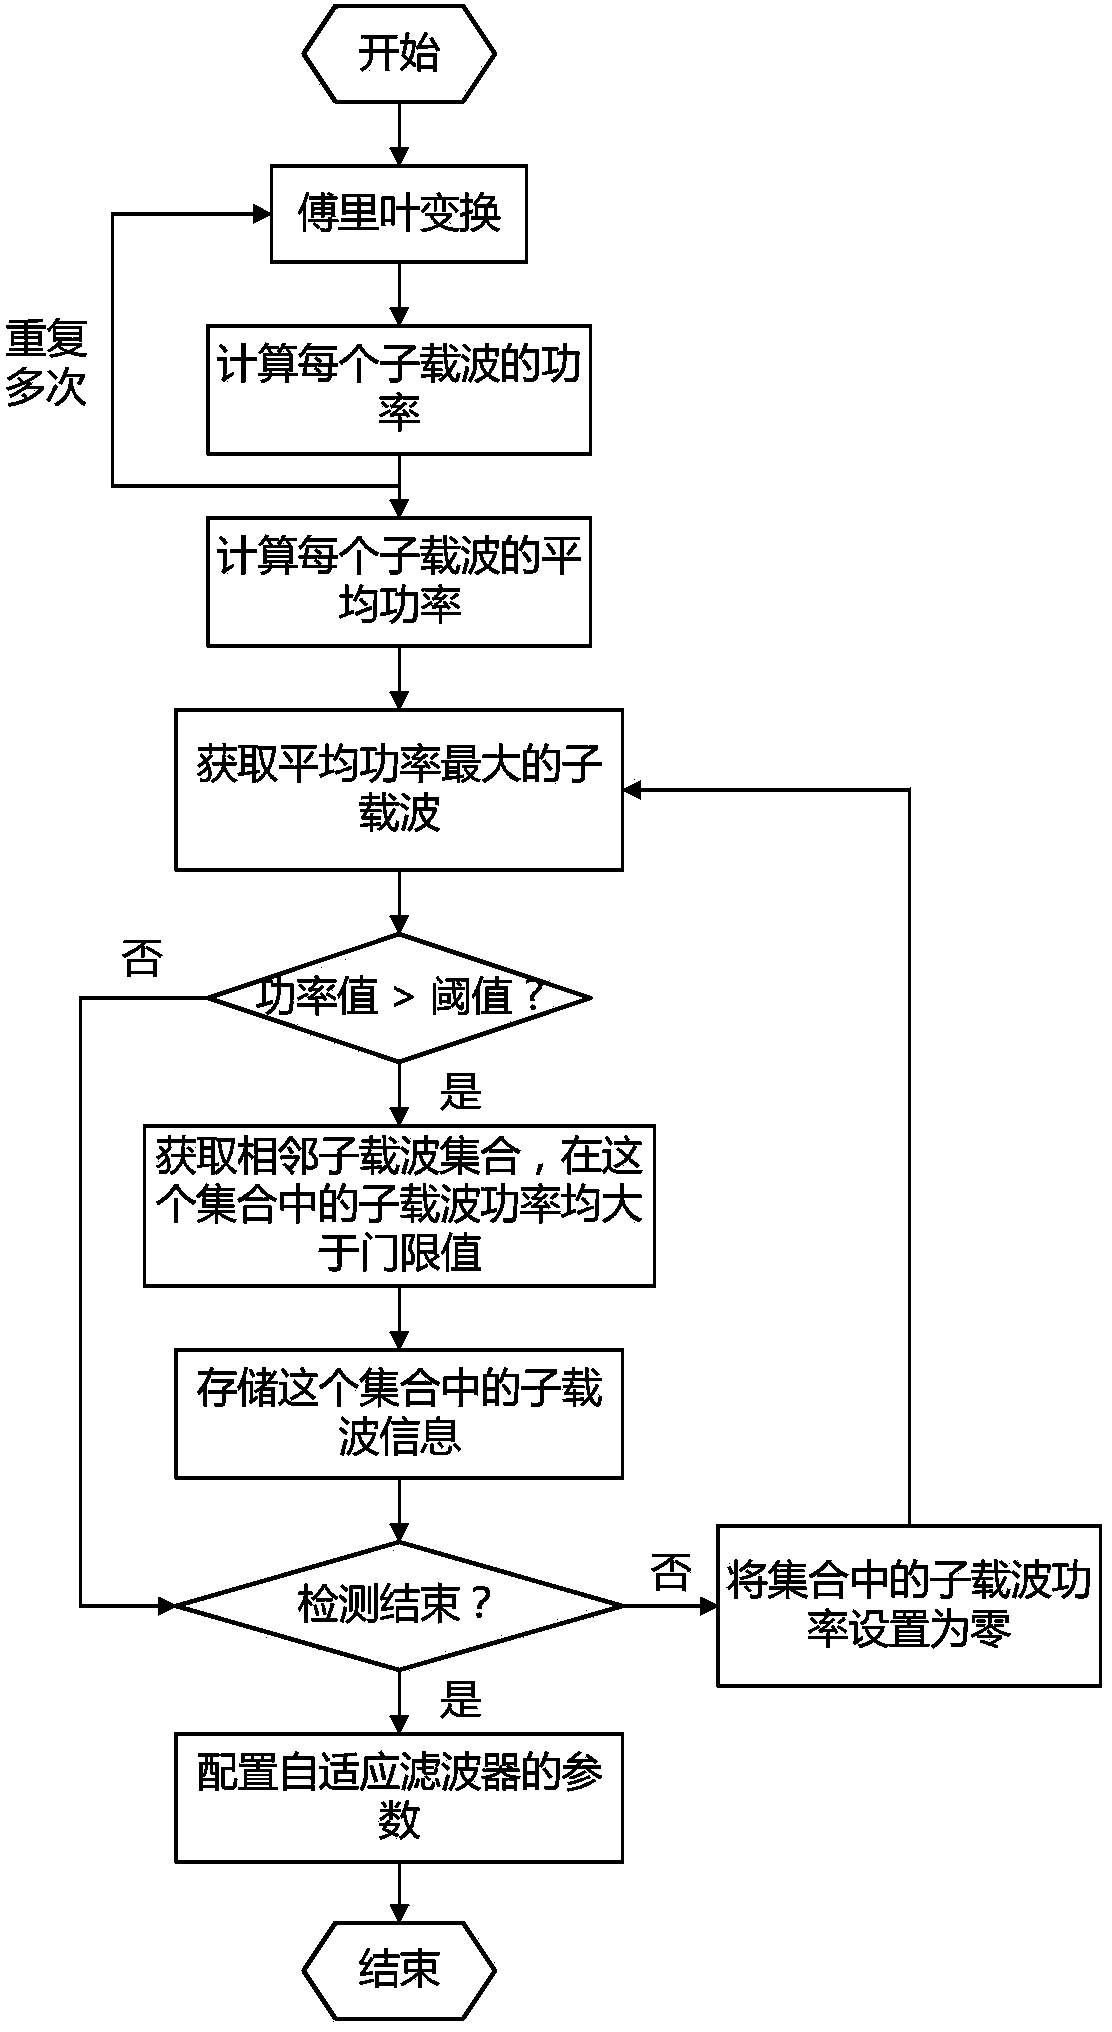 Timing synchronization method and system for power line carrier communication